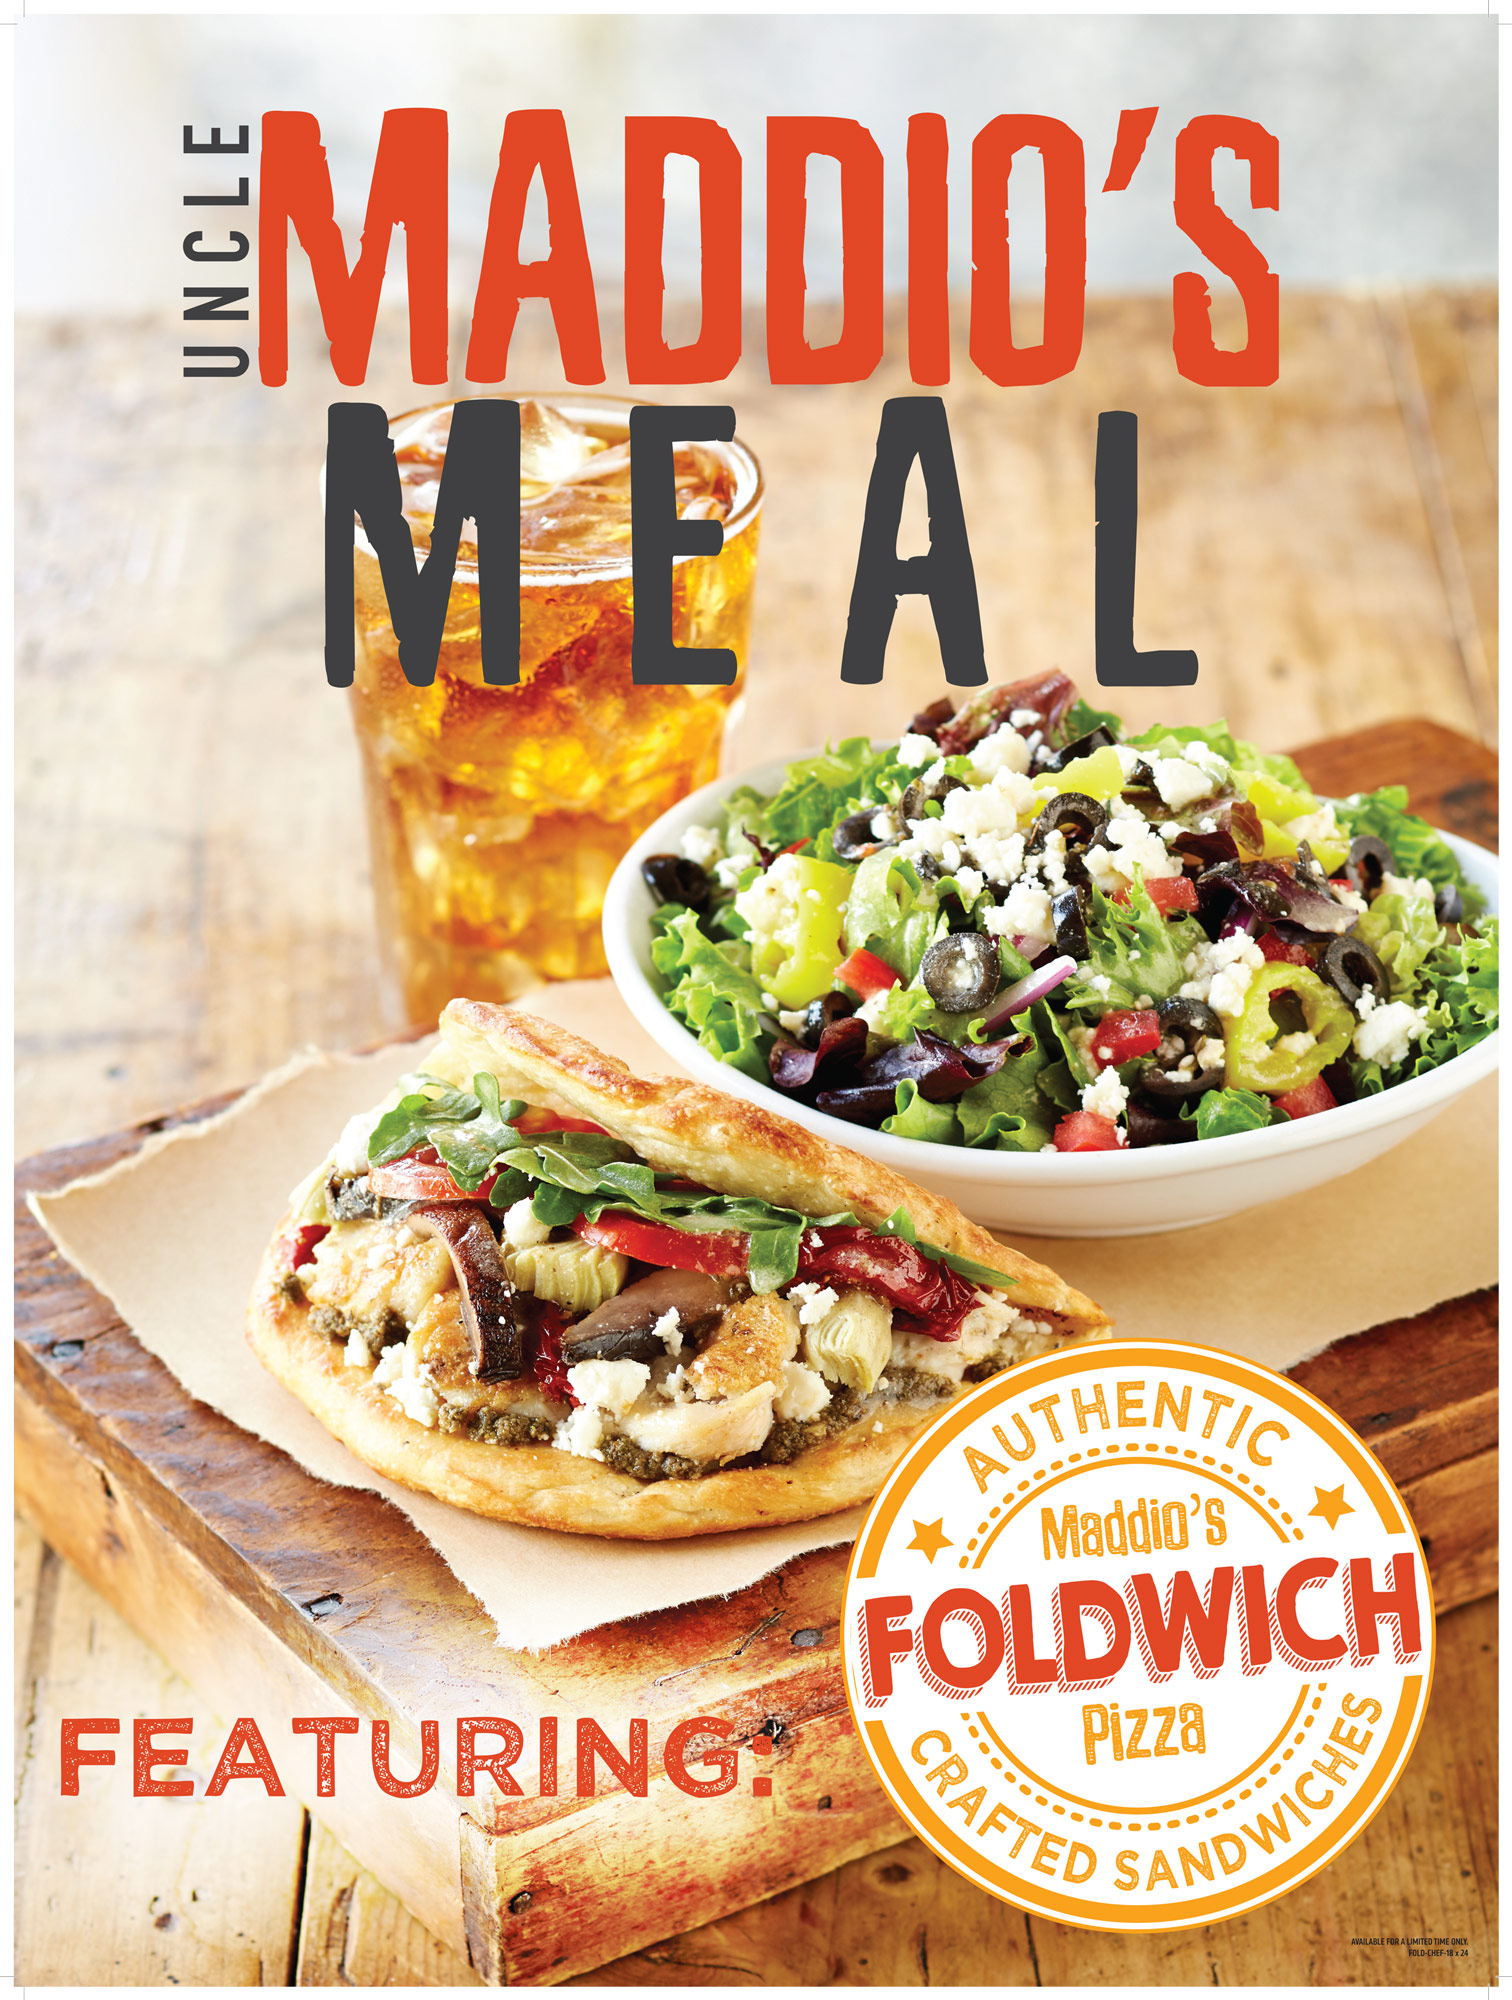 Uncle-Maddio's-Meal-Foldwich-Salad